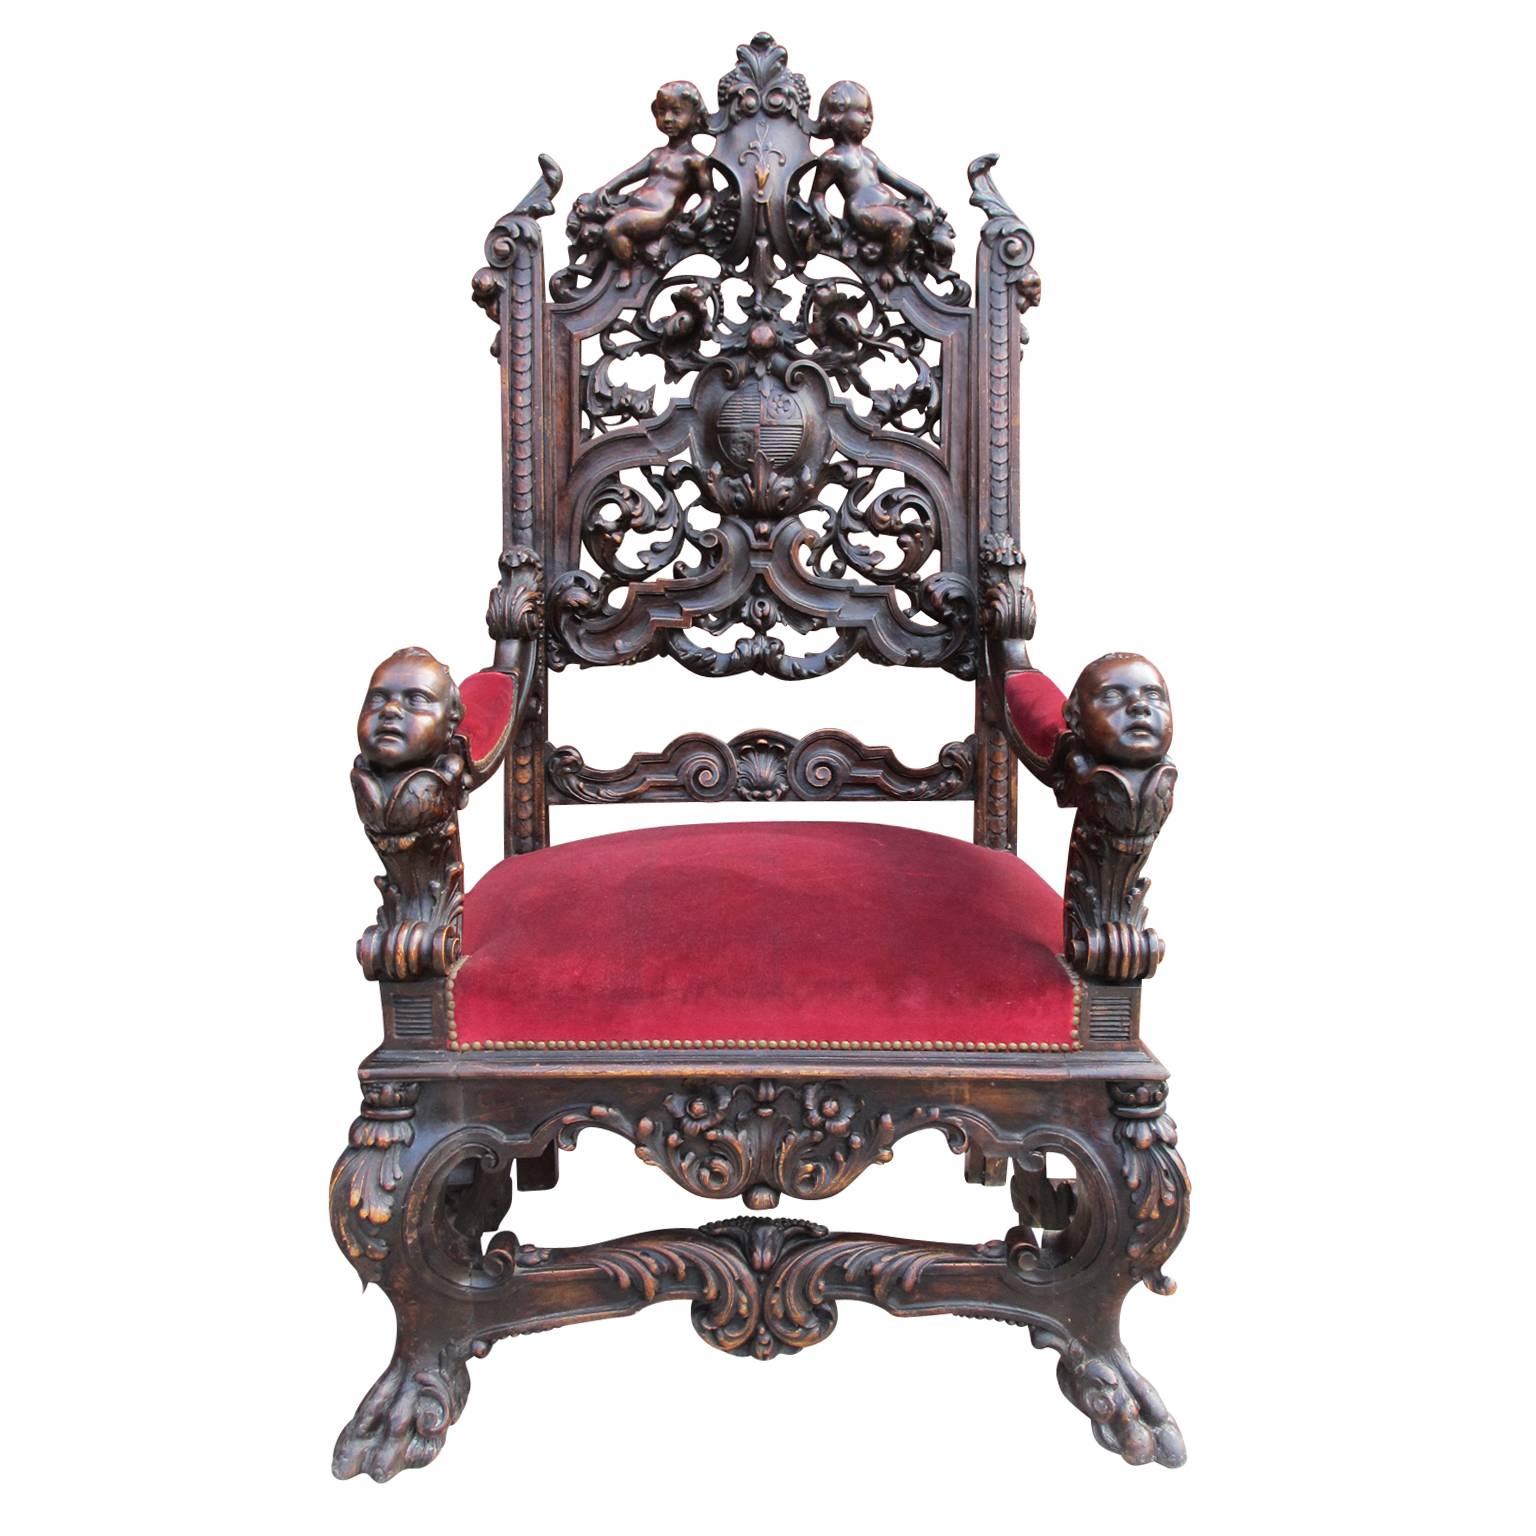 A fine and palatial pair of Italian 19th century renaissance style carved walnut figural throne armchairs. The intricately carved Baroque frames with the backrests depicting a pair of resting Putti above foliage, scrolls and acanthus, centred with a